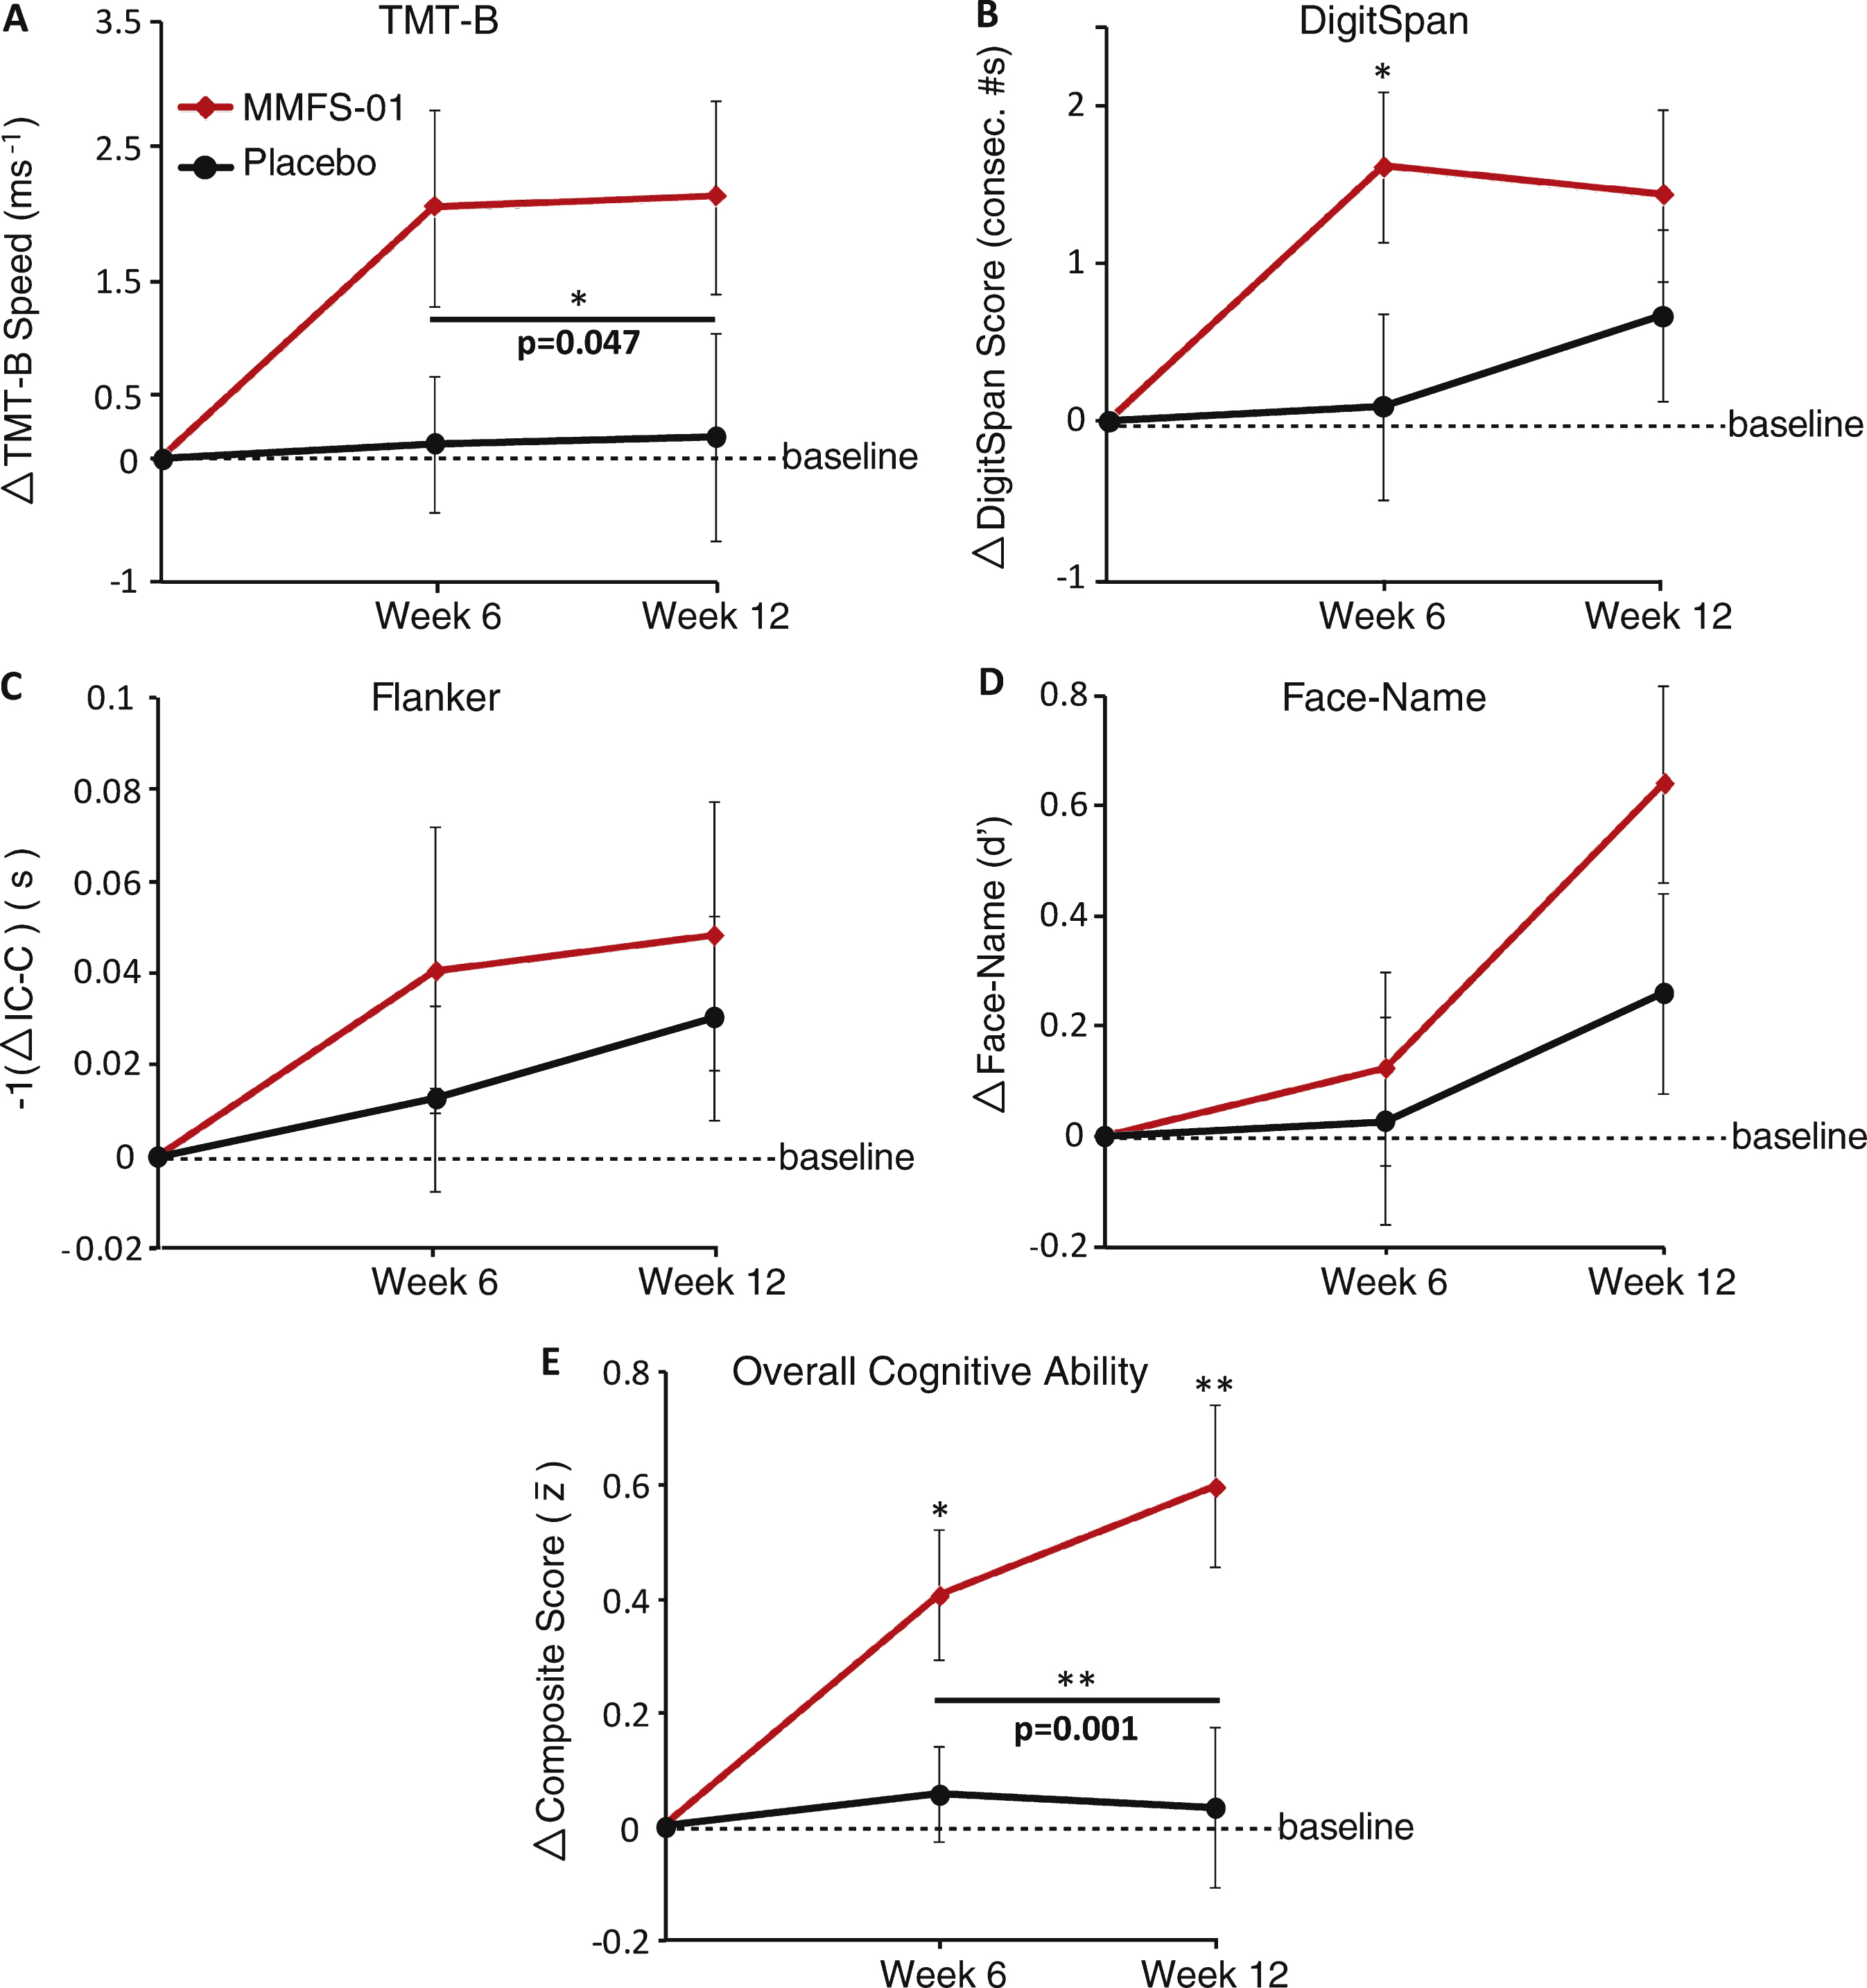 Cognitive endpoints for MMFS-01 and placebo. Change from baseline (dashed line) was evaluated at Week 6 and Week 12 for MMFS-01 (red line) and placebo (black line) treated groups in four cognitive tests: TMT-B (A), DigitSpan (B), Flanker (C), and Face-Name (D). TMT-B is presented as speed (milliseconds) to complete 25 circle connections, DigitSpan as the number of consecutive numbers (consec. #s) repeated without error, Flanker as the opposite of the difference between Congruent time and Incongruent time –1 (IC-C) in seconds, and Face-Name as relative d’ score. The opposite of change in IC-C is shown to illustrate positive change for improvement in the task. Overall cognitive ability (composite score) is the average of the z scores (z¯) of the four cognitive tests, presented as the change in composite score from baseline (E). Asterisk over individual time points denotes significance between MMFS-01 and placebo only at that time point whereas asterisk over line between Week 6 and Week 12 denotes a significant overall treatment effect. *p <  0.05, **p <  0.01. All values are mean ± SEM.